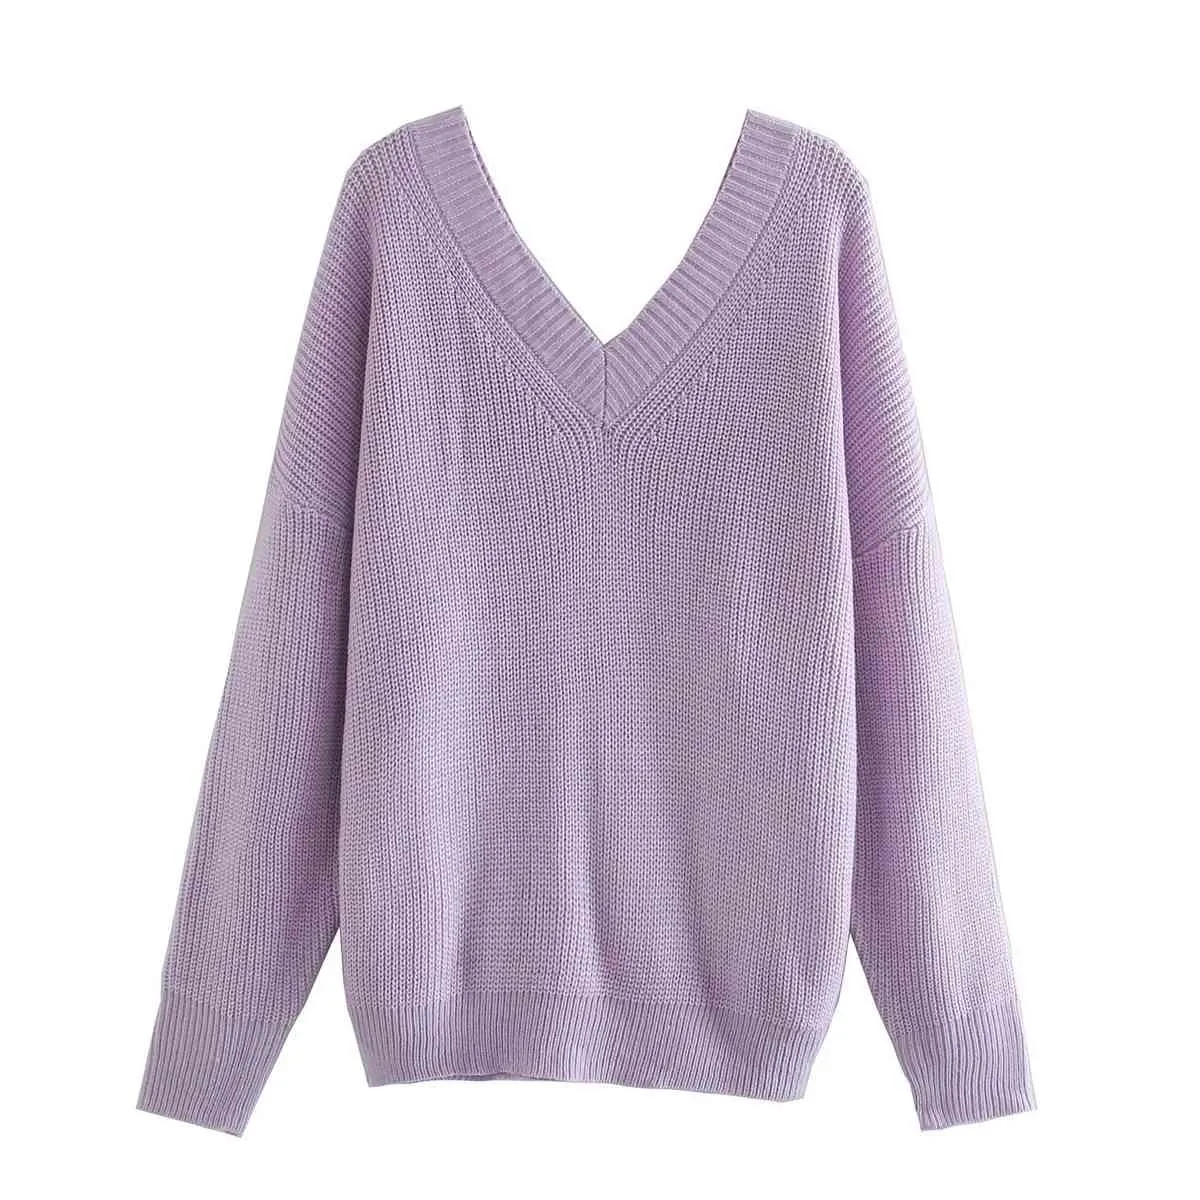 Mode violet pull tricoté femmes hiver Sexy à manches longues pull femme pull ovsesize pull coréen 210521